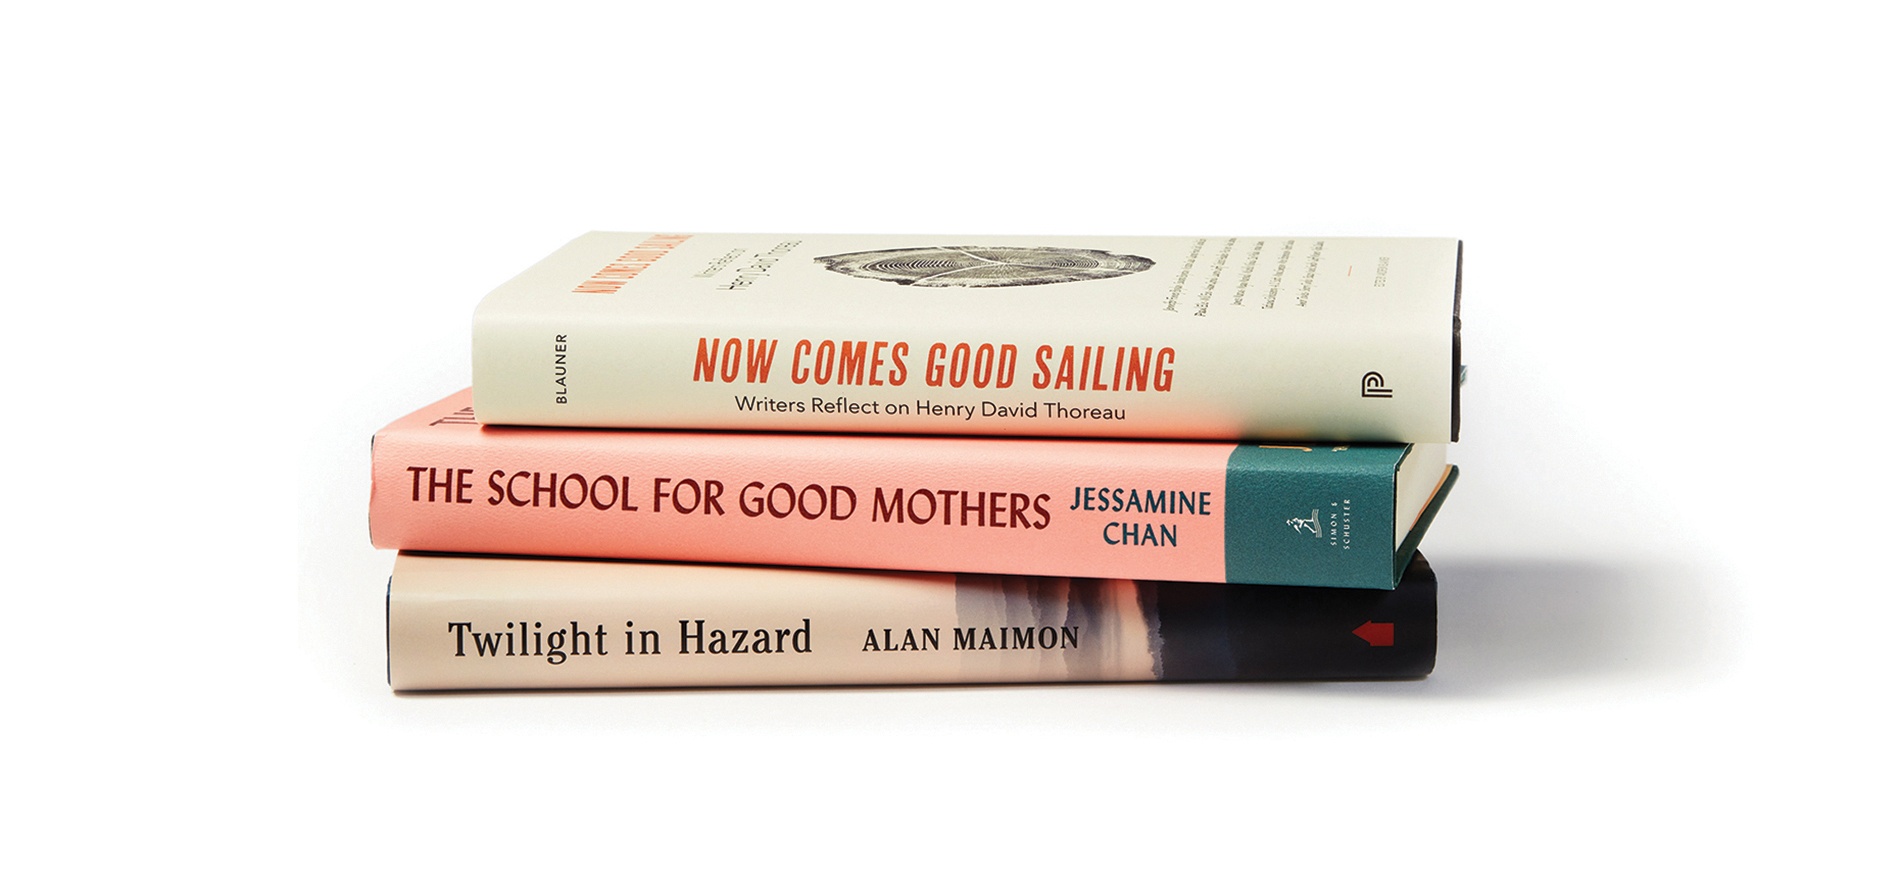 Books by Alan Maimon, Jessamine Chan, and Andrew Blauner